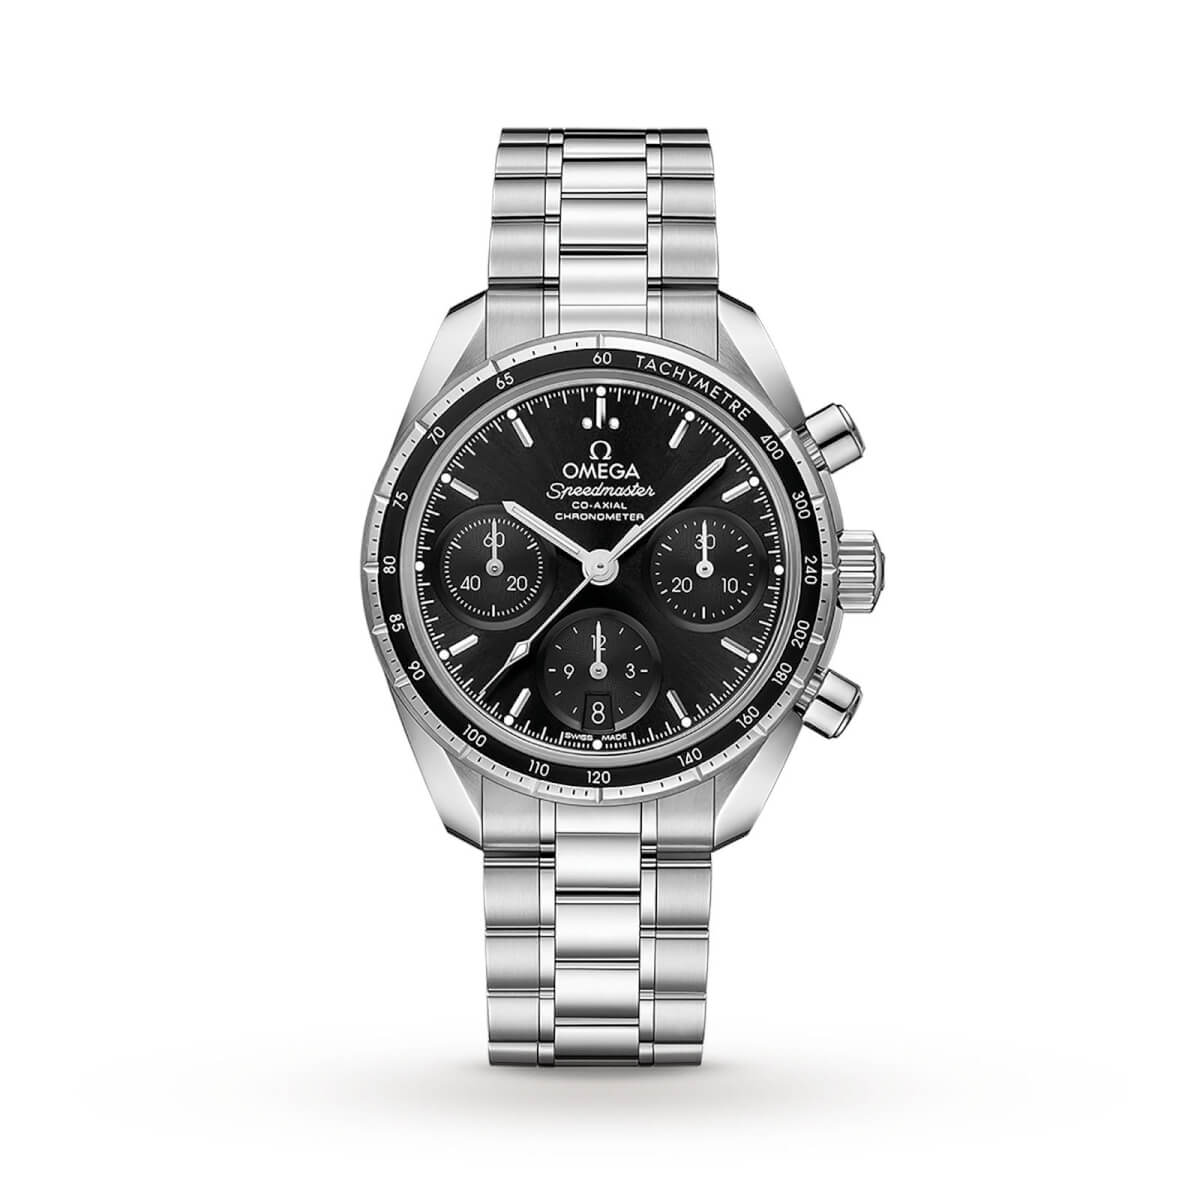 Speedmaster 38mm Co-Axial Chronograph Automatic Watch